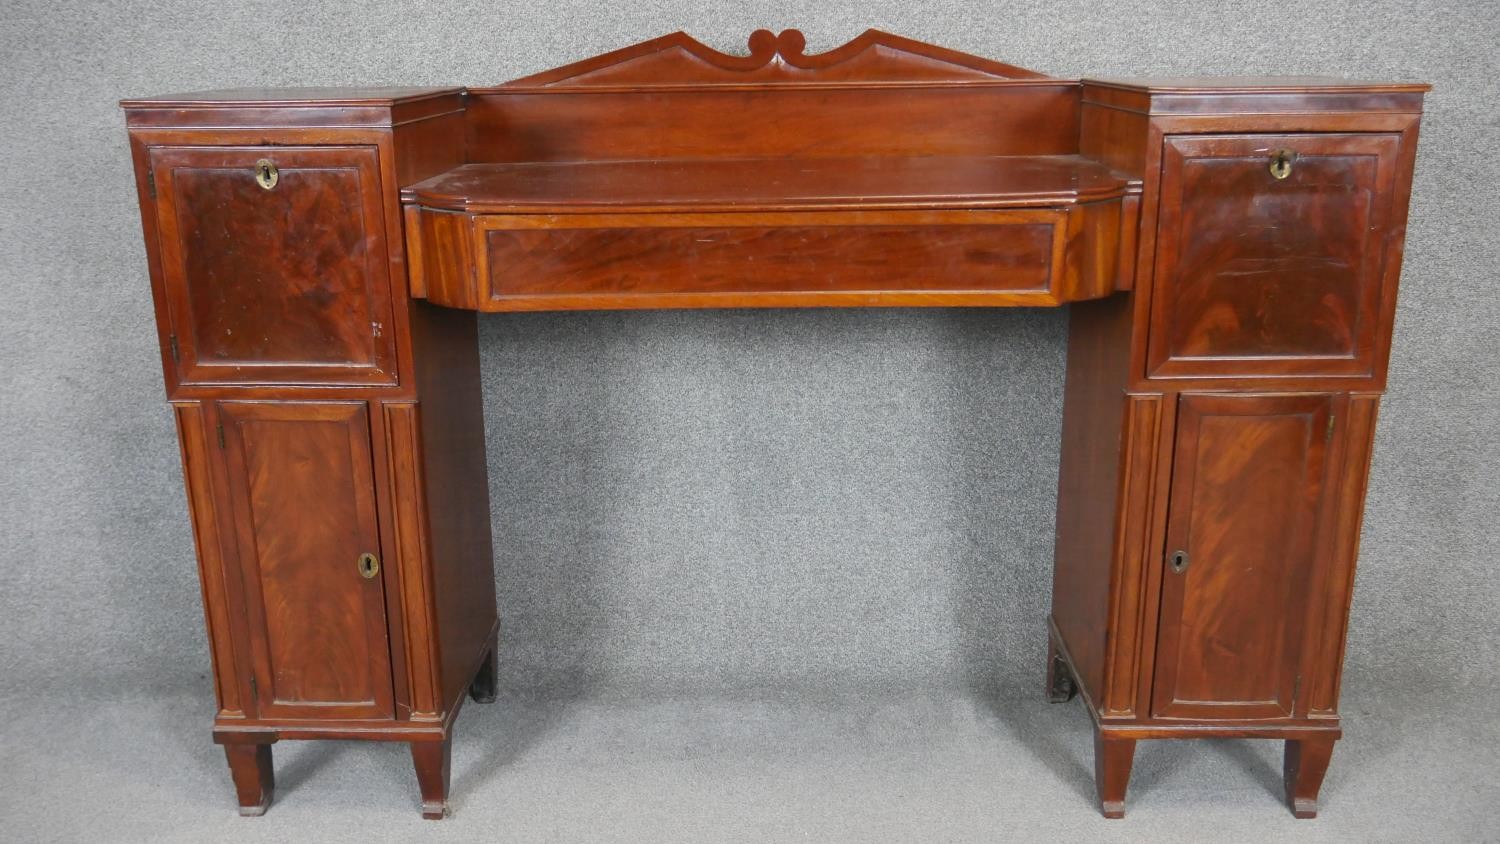 A Regency mahogany twin pedestal sideboard with flame mahogany panel doors flanked by pilasters on